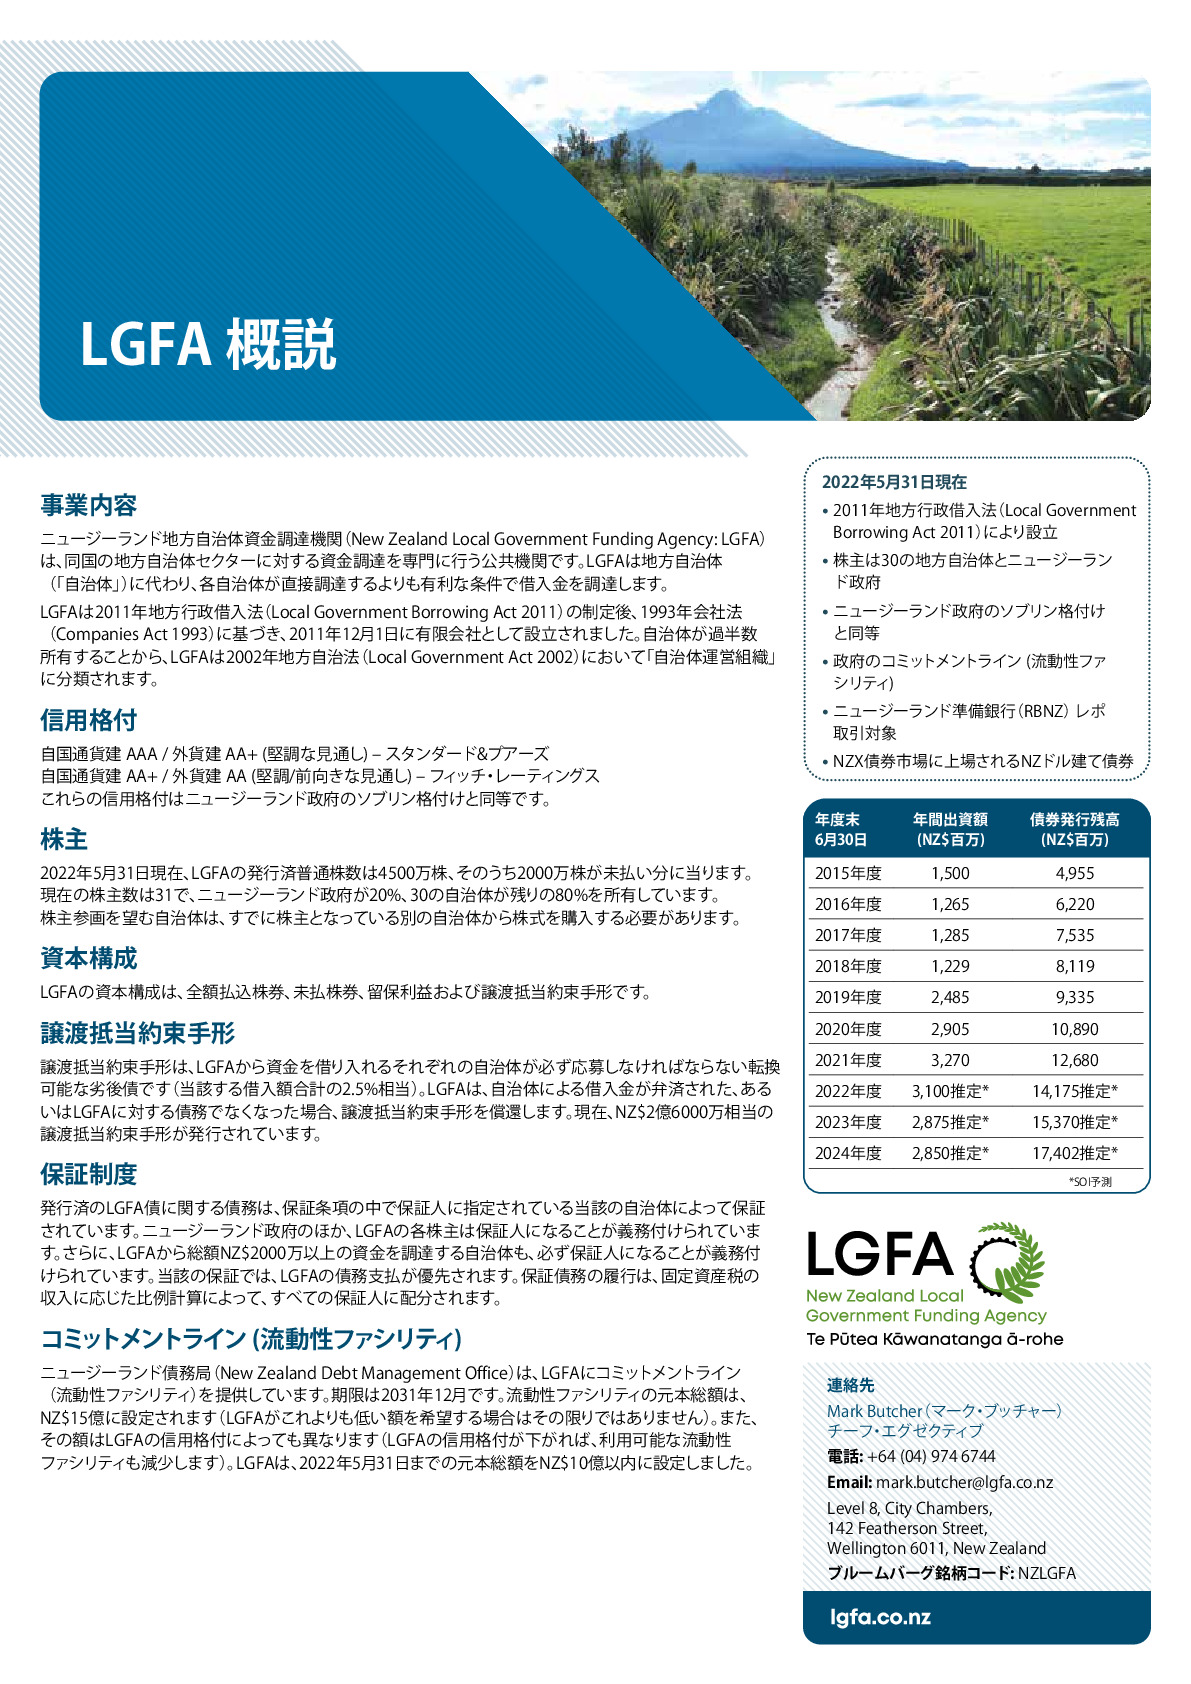 LGFA_Overview_May22 - Japanese